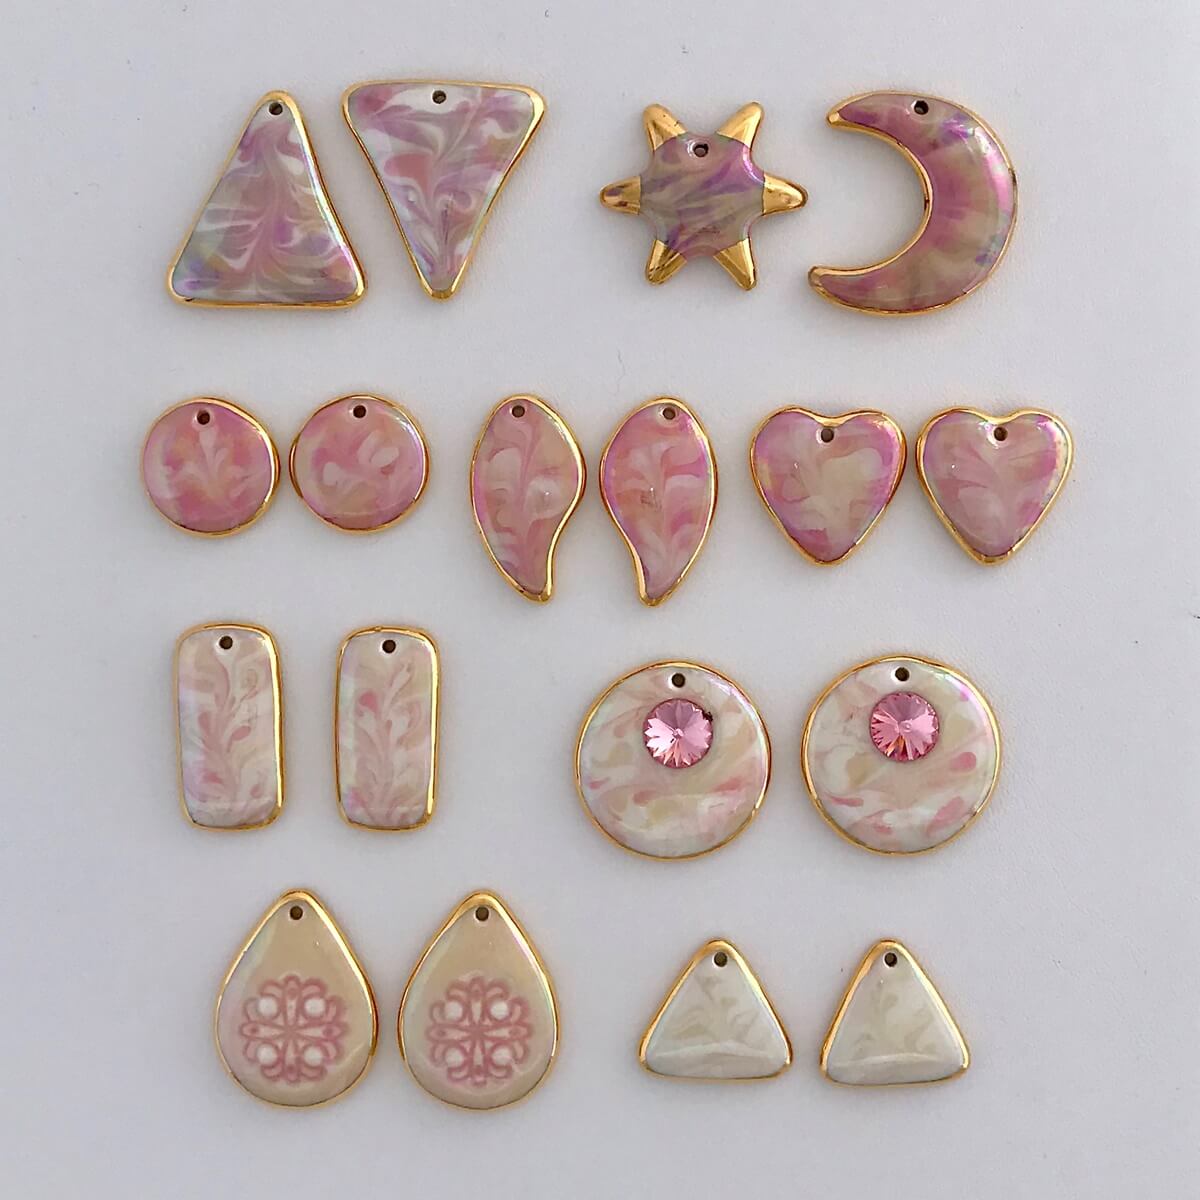 Earring components in shades of pink.